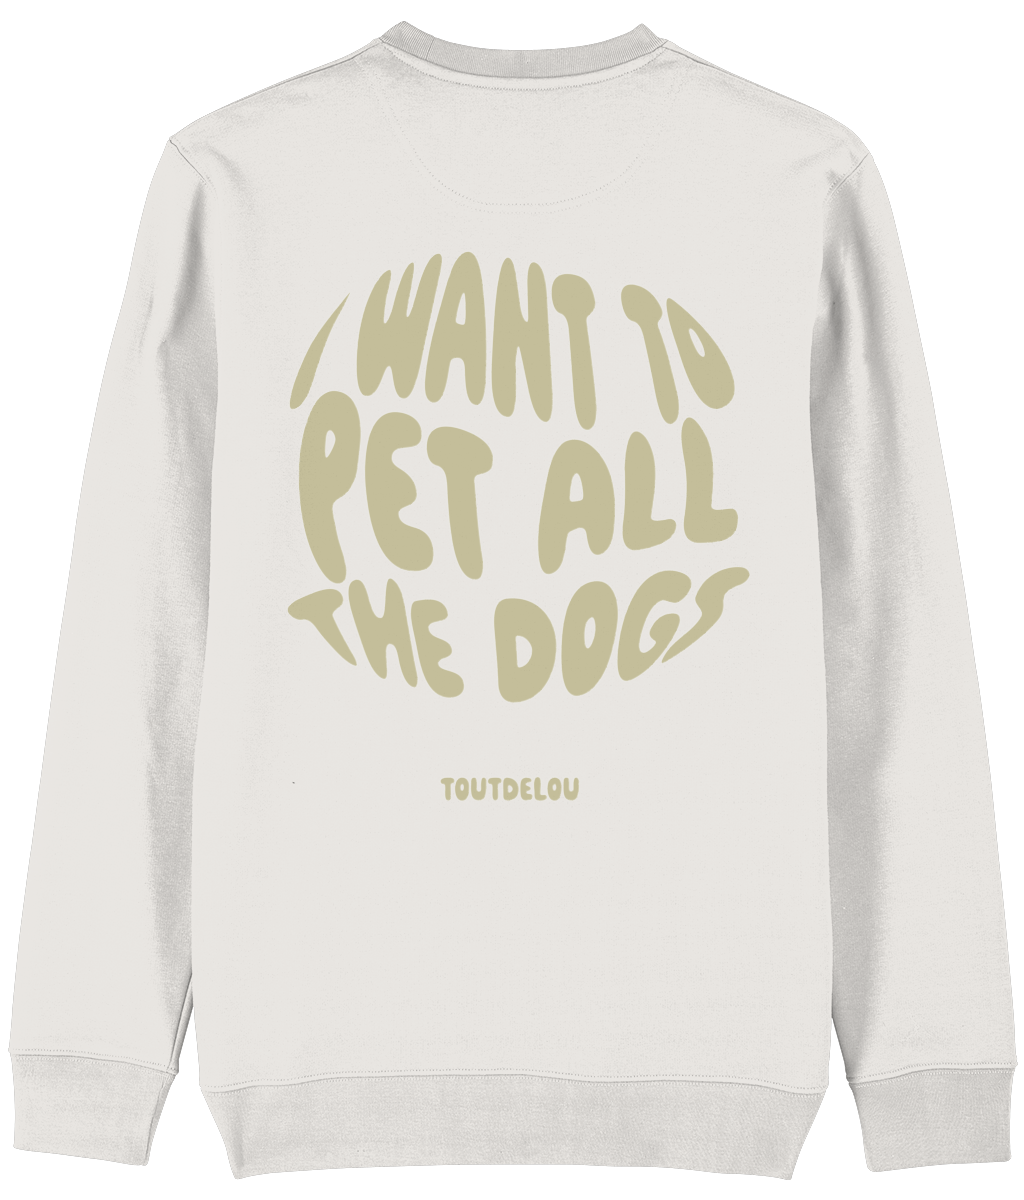 Sweater - pet all the dogs - olive - print on front and back